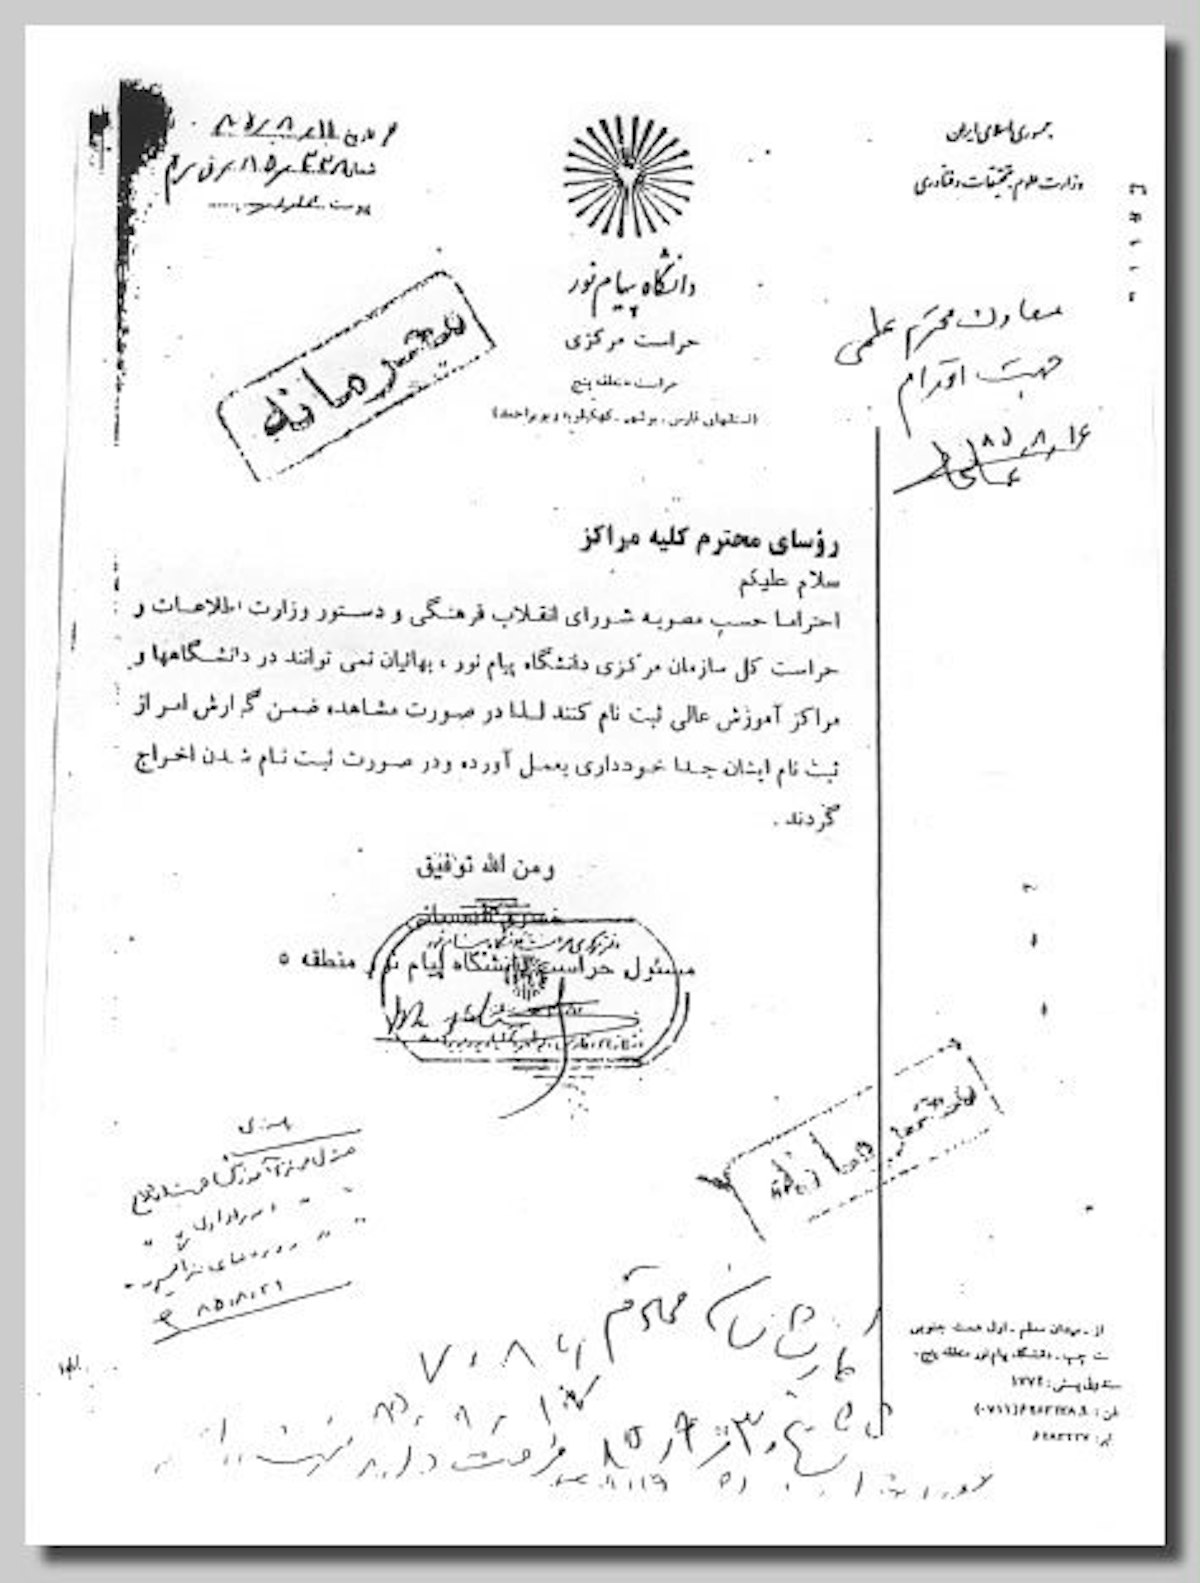 A 2 November 2006 letter from Payame Noor University's "Central Protection Office," issued on the letterhead of Iran's Ministry of Science, Research and Technology, states that it is official policy that "Baha'is cannot enroll in universities and higher education centers" and "if they are already enrolled they should be expelled." The letter was recently obtained by the Baha'i International Community.